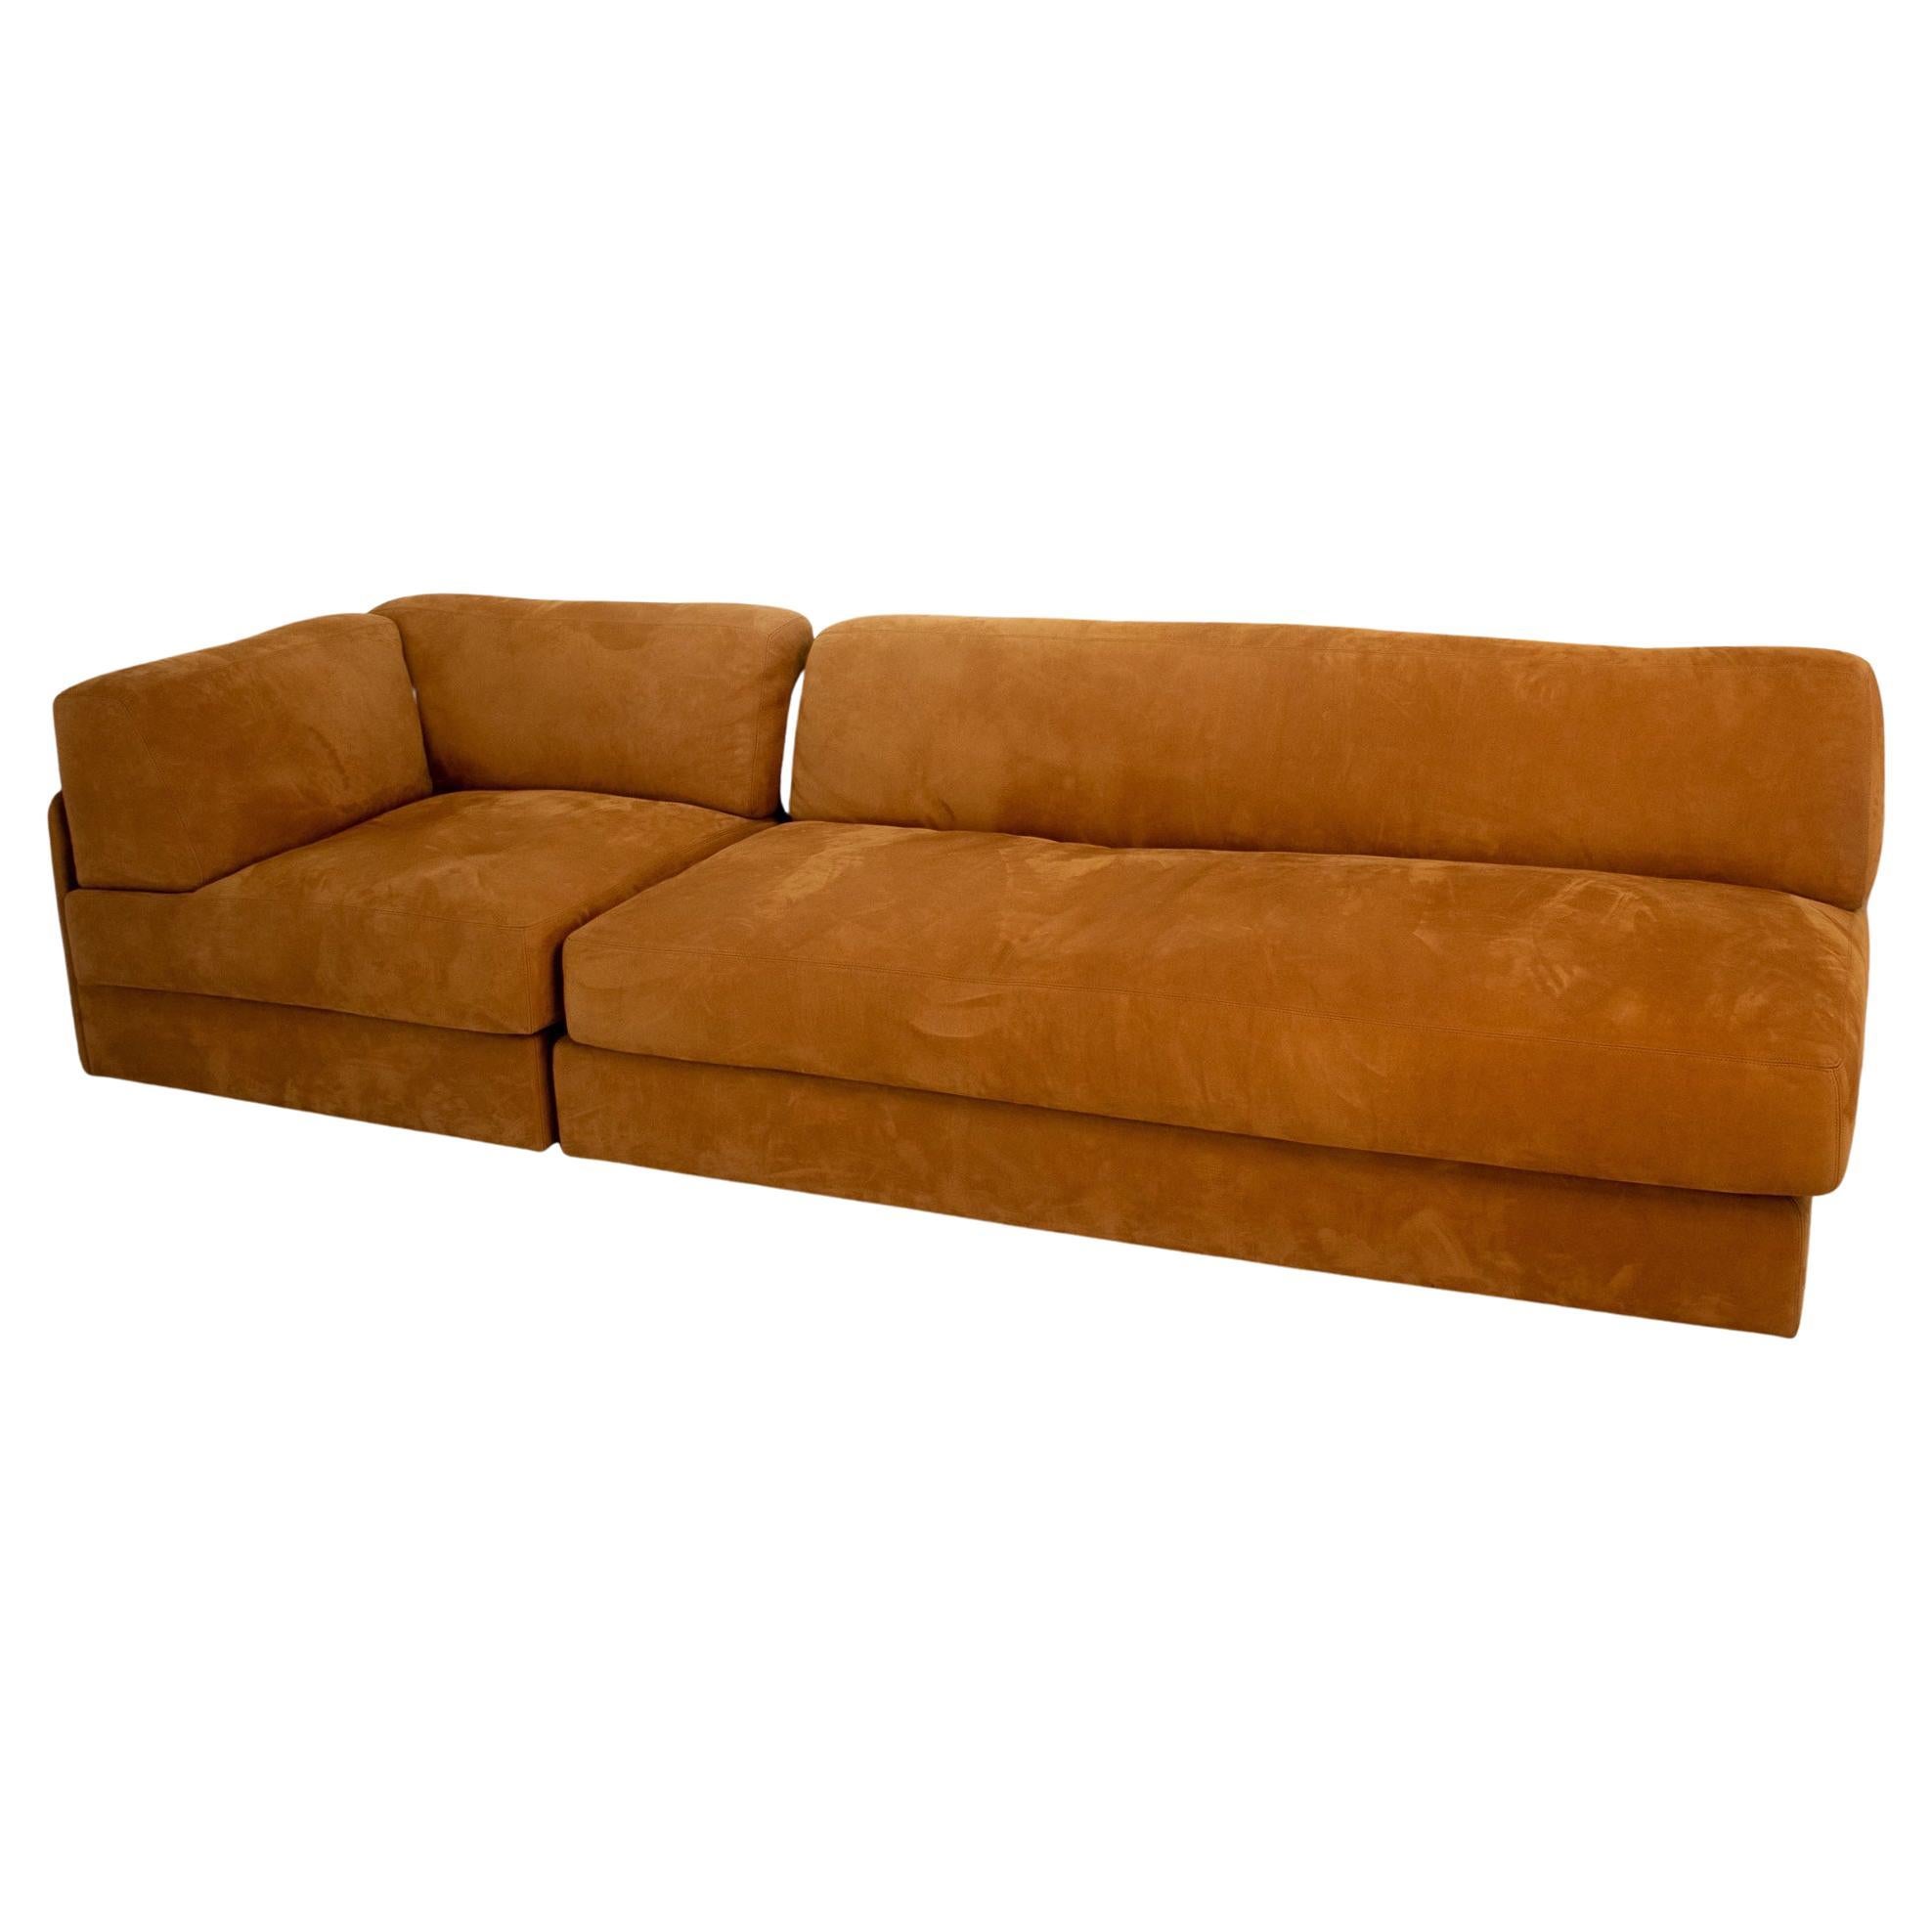 Contemporary Modular Sofa in Tan Suede, Handmade in the UK For Sale